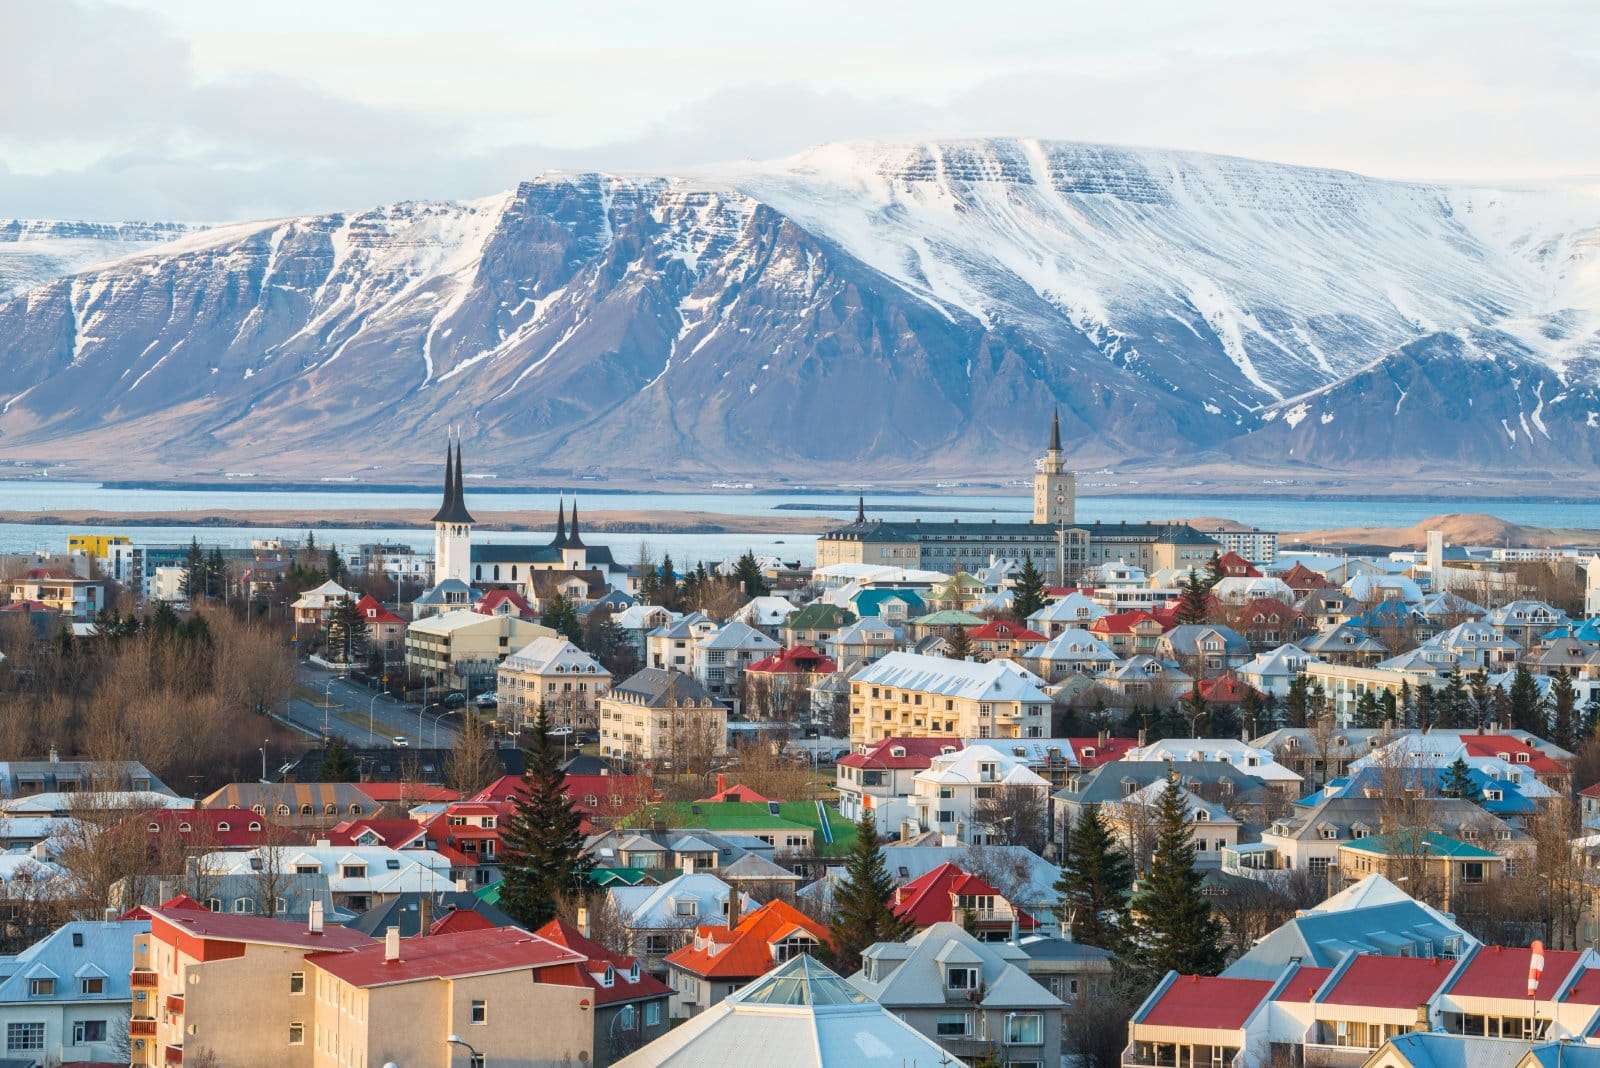 <p><span>Known for its incredible natural beauty, living in Iceland as a remote worker sounds enticing – just be aware that the country has an exceptionally high-income requirement for digital nomads!</span></p><p><b>Cost of application:</b><span> 88 EUR</span></p><p><b>Income requirement:</b><span> 7300 EUR per month </span></p><p><b>Visa duration: </b><span>6 months</span> </p>